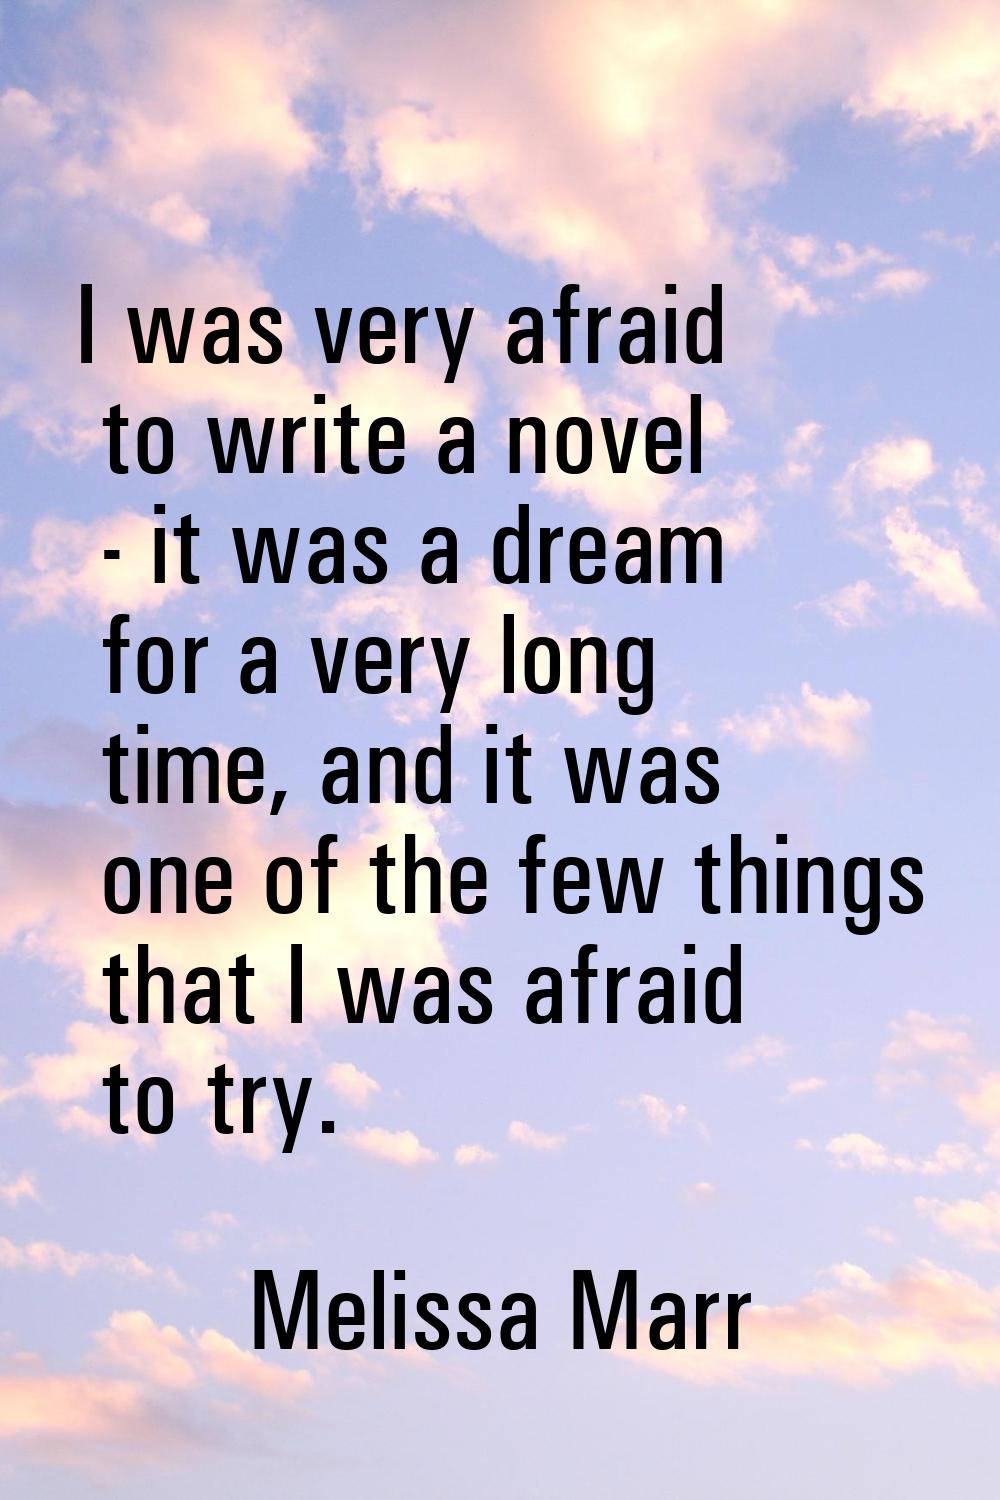 I was very afraid to write a novel - it was a dream for a very long time, and it was one of the few